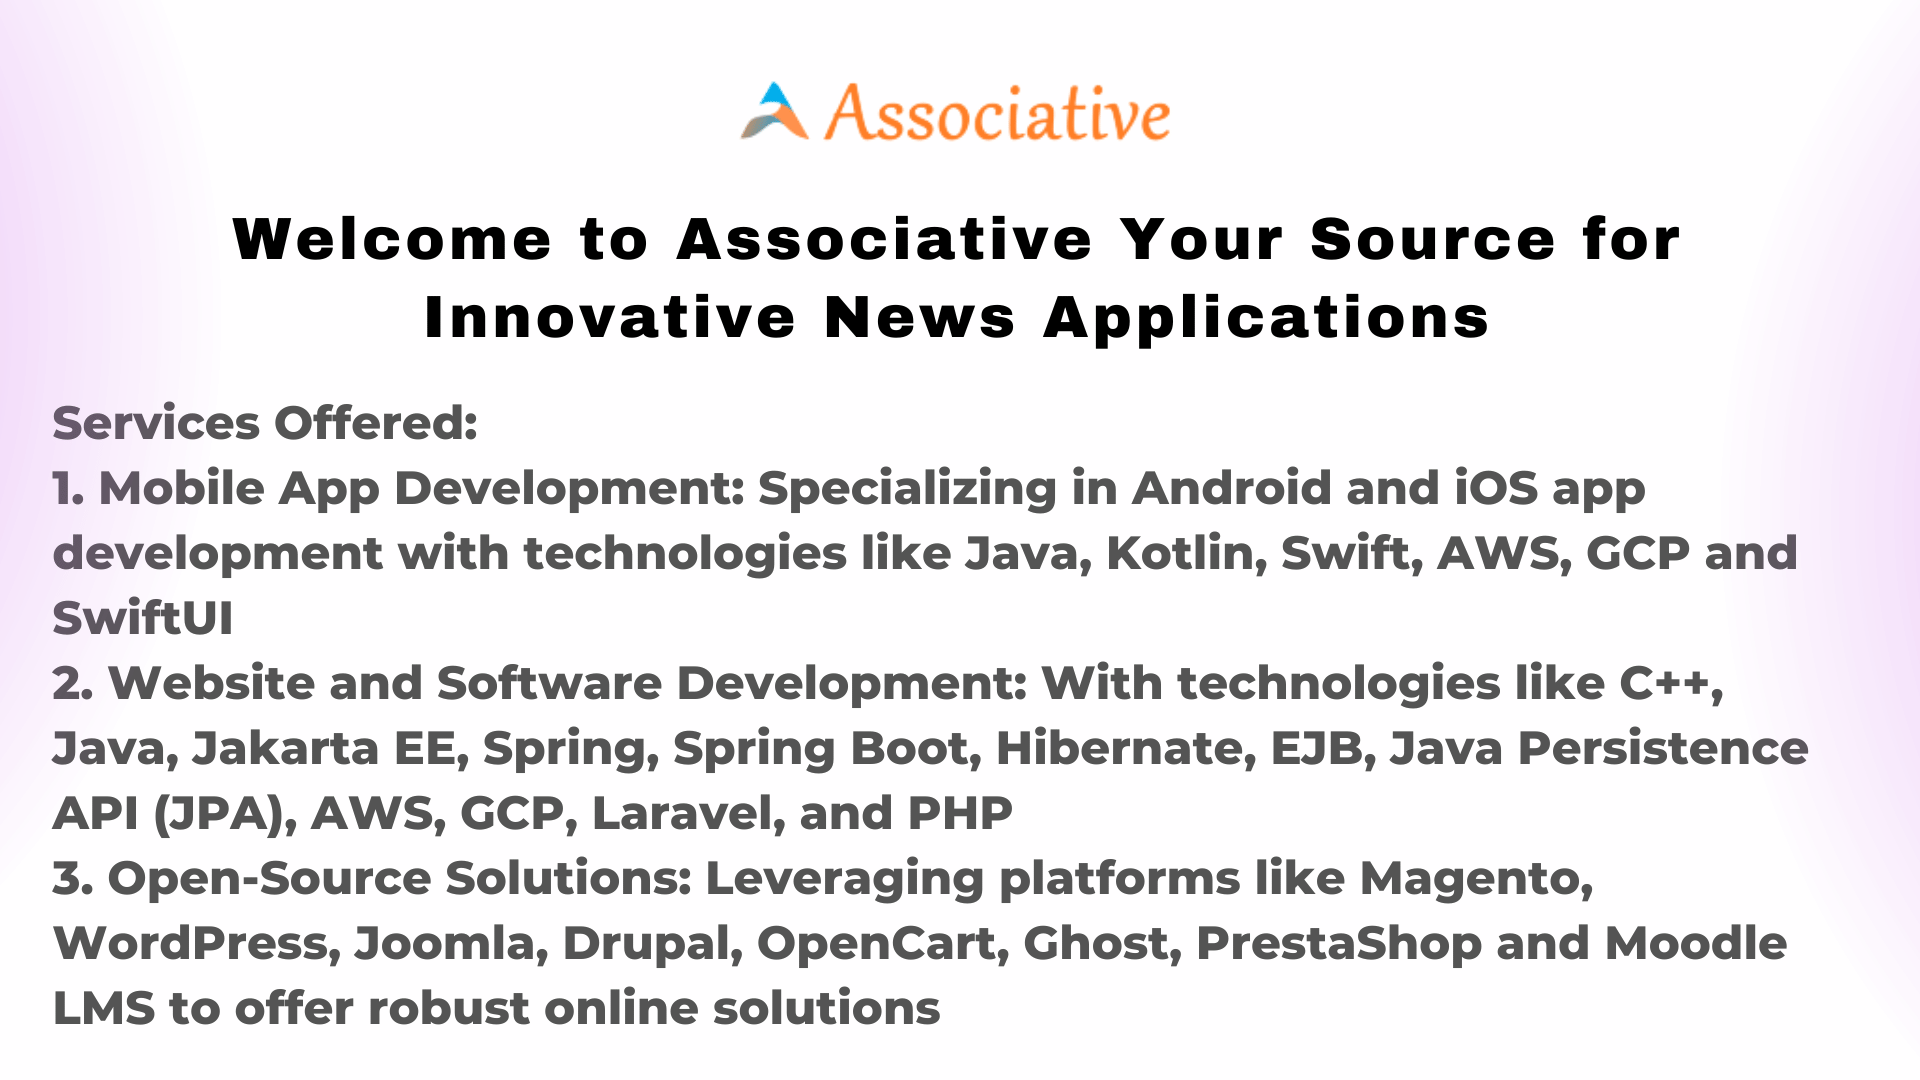 Welcome to Associative Your Source for Innovative News Applications